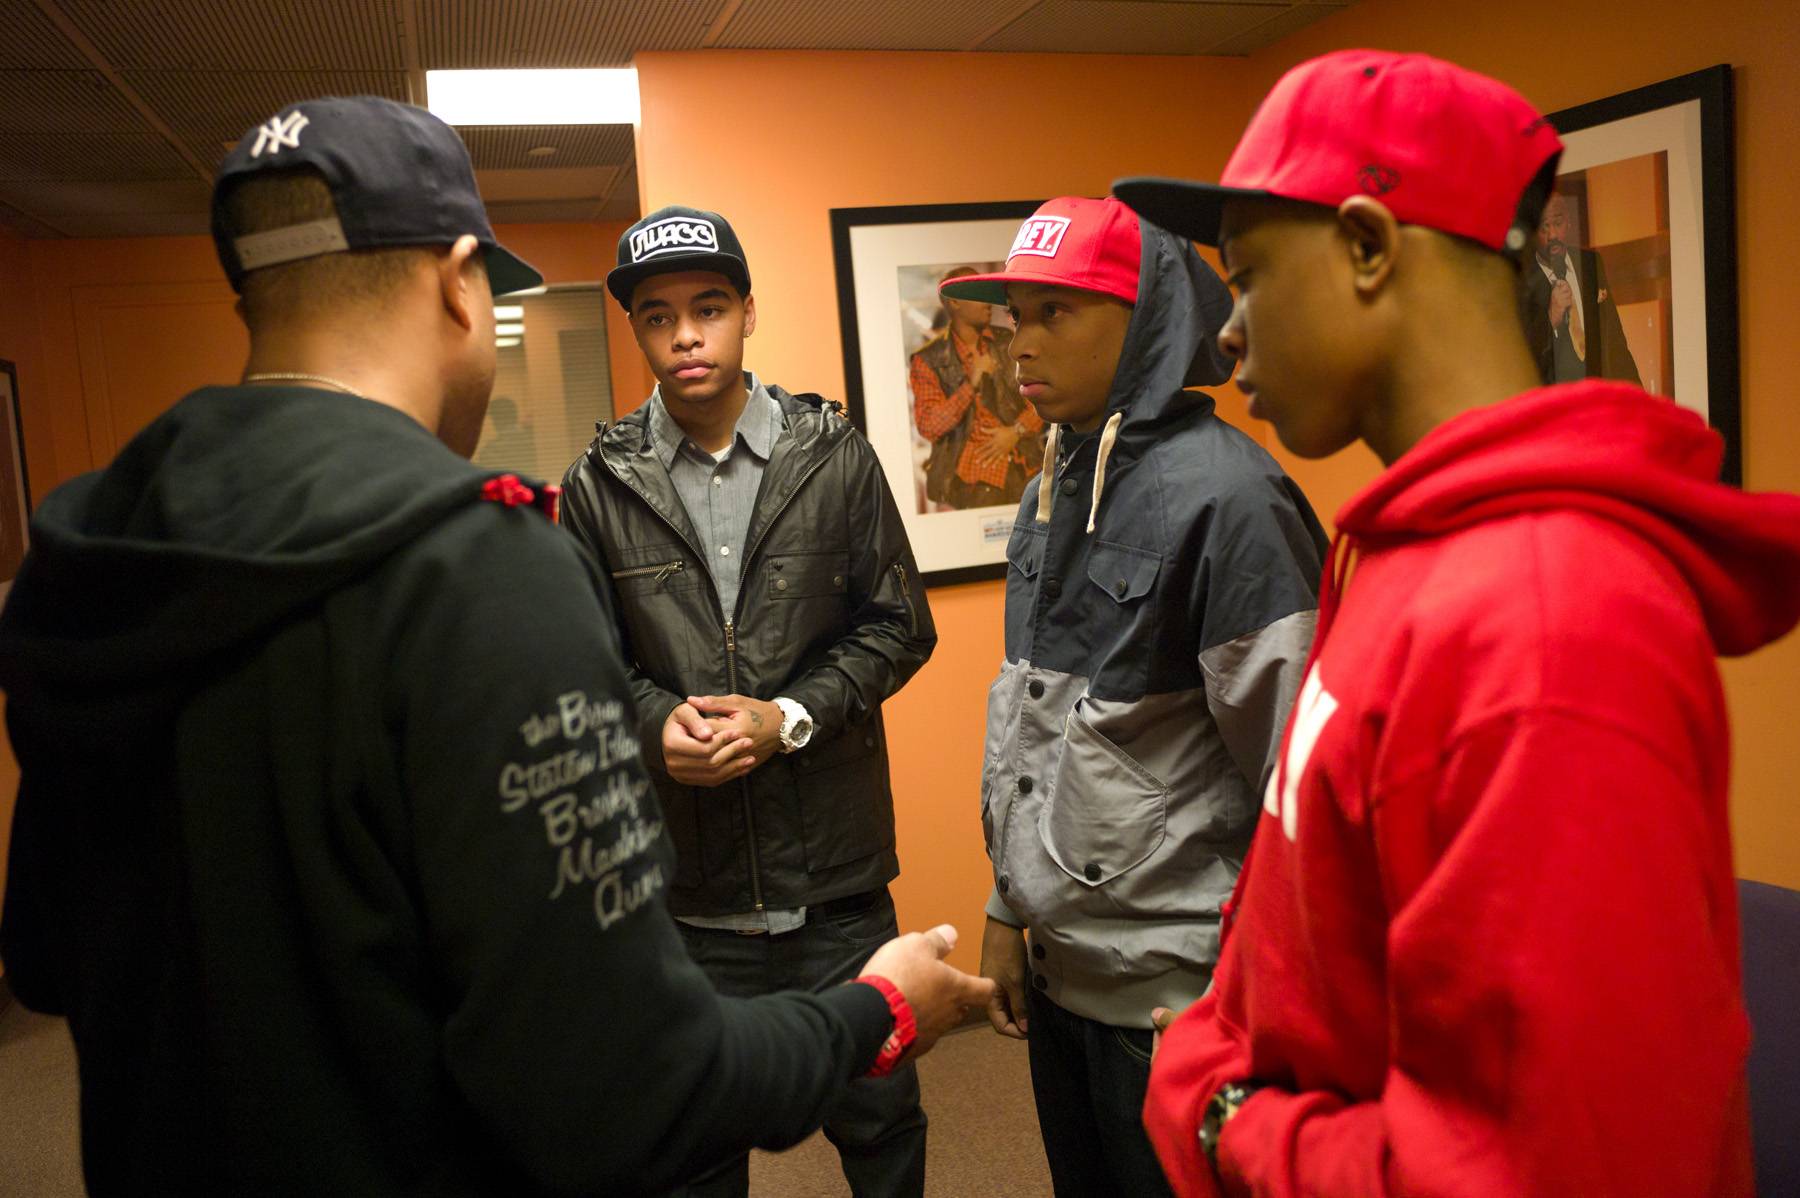 Let's Get It Poppin - The Ranger$ at production meeting backstage at BET's 106 &amp; Park on October 17, 2011. (Photo: John Ricard / BET)